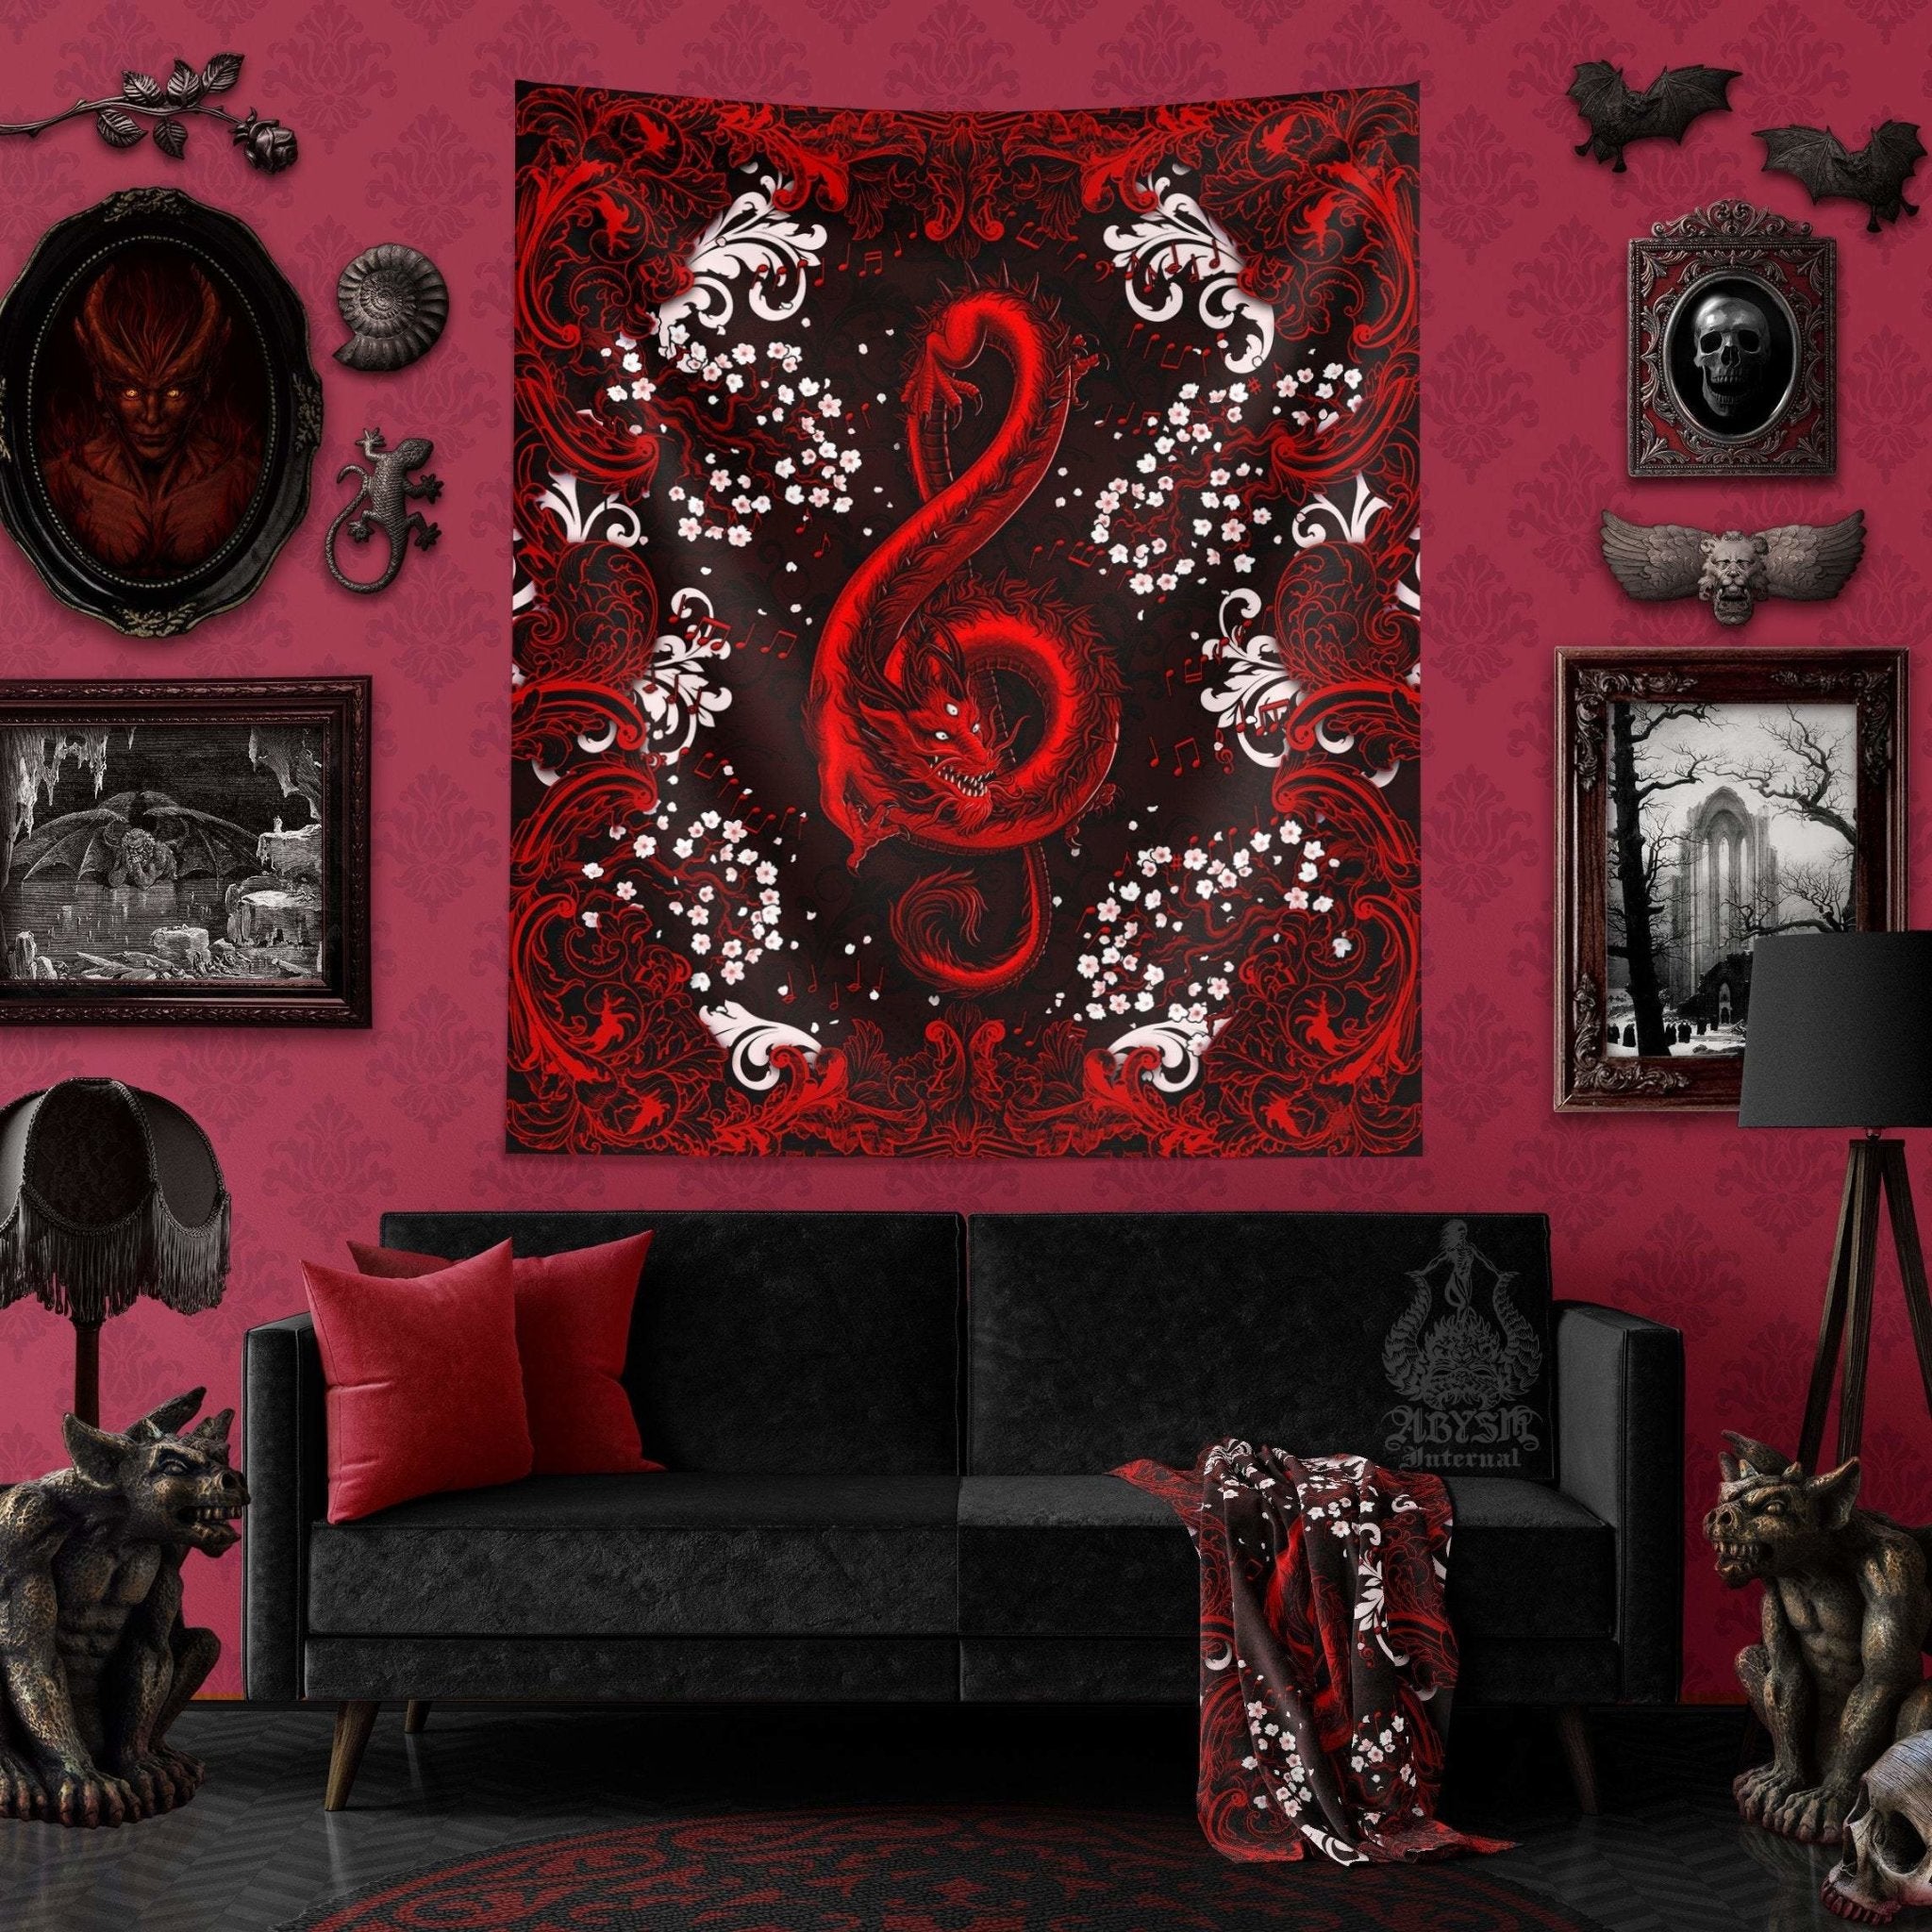 Red Dragon Tapestry, Music Wall Hanging, Gothic Home Decor, Art Print - Bloody Black, Treble Clef - Abysm Internal